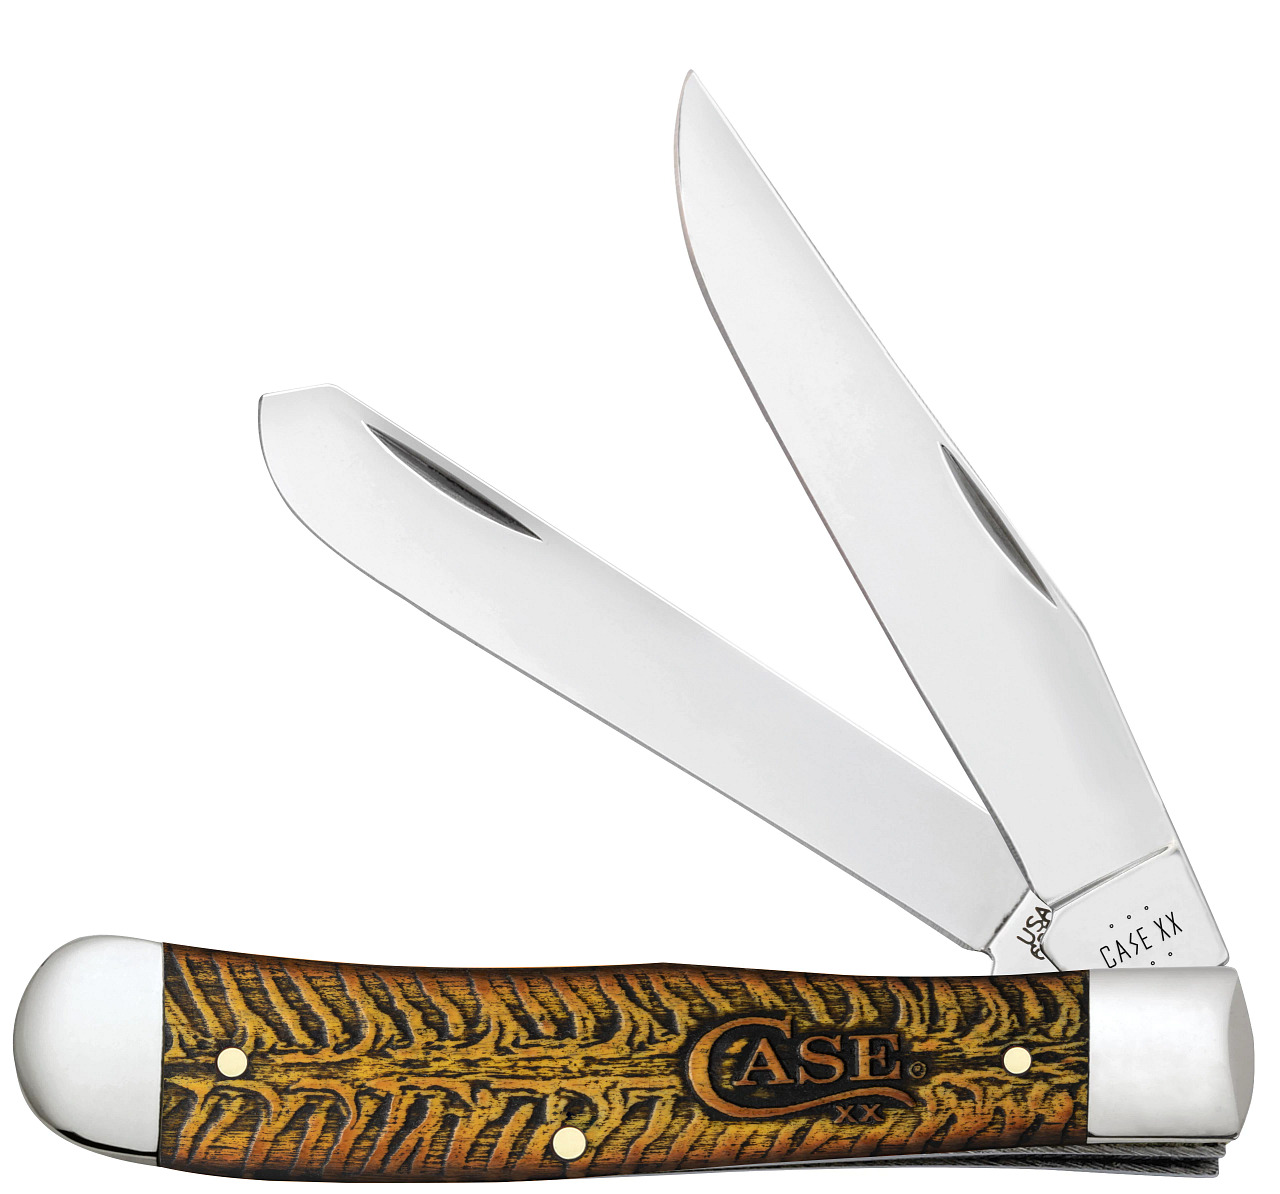 Case xx Knives Trapper Golden Pinecone 81800 Steel Stainless Pocket Knife